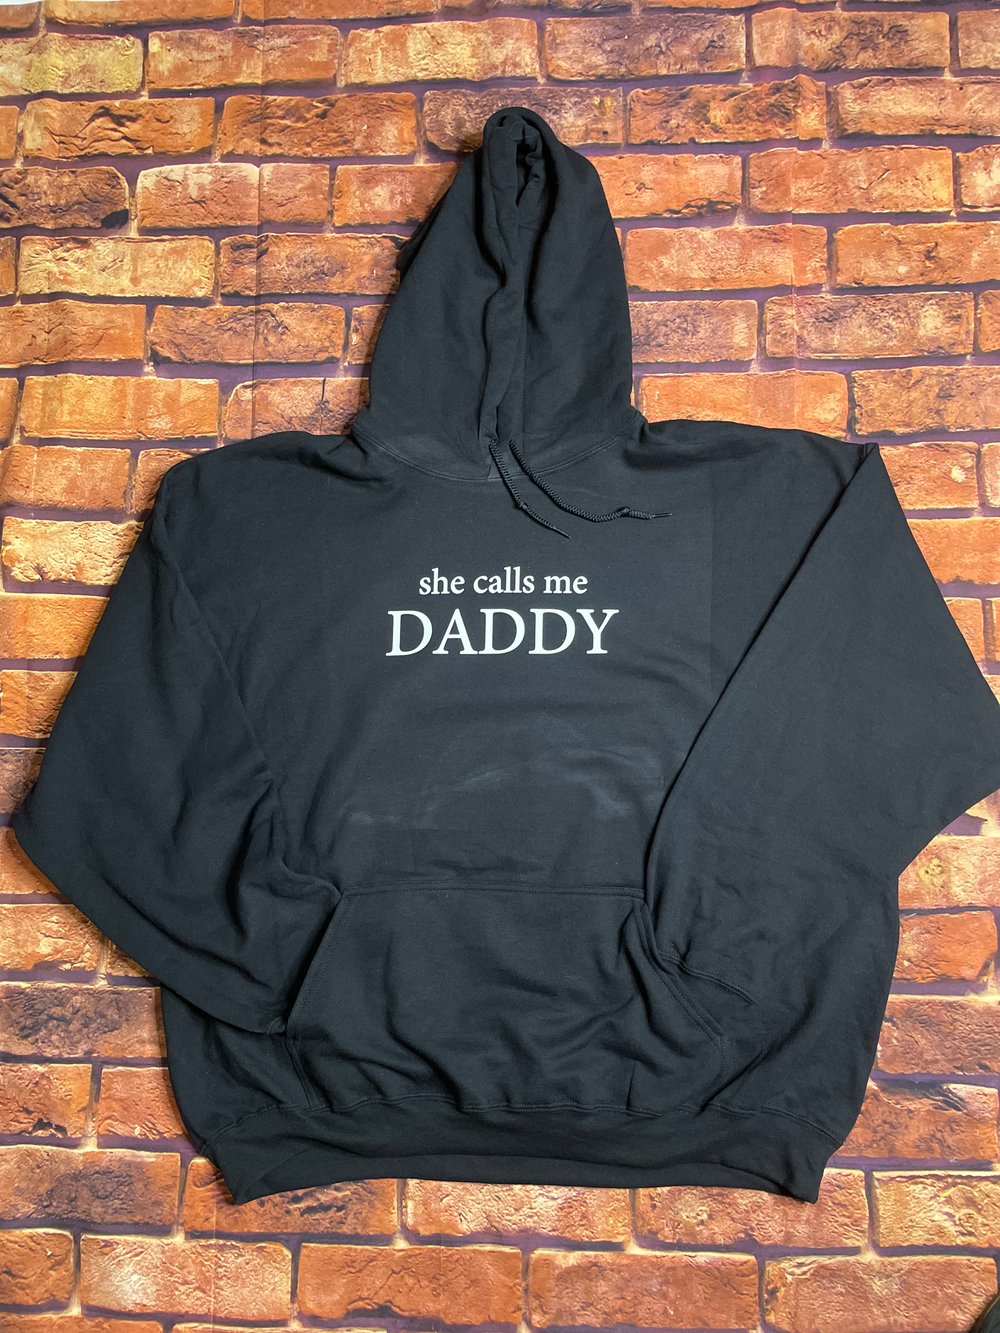 She calls me daddy hoodie - multiple colors